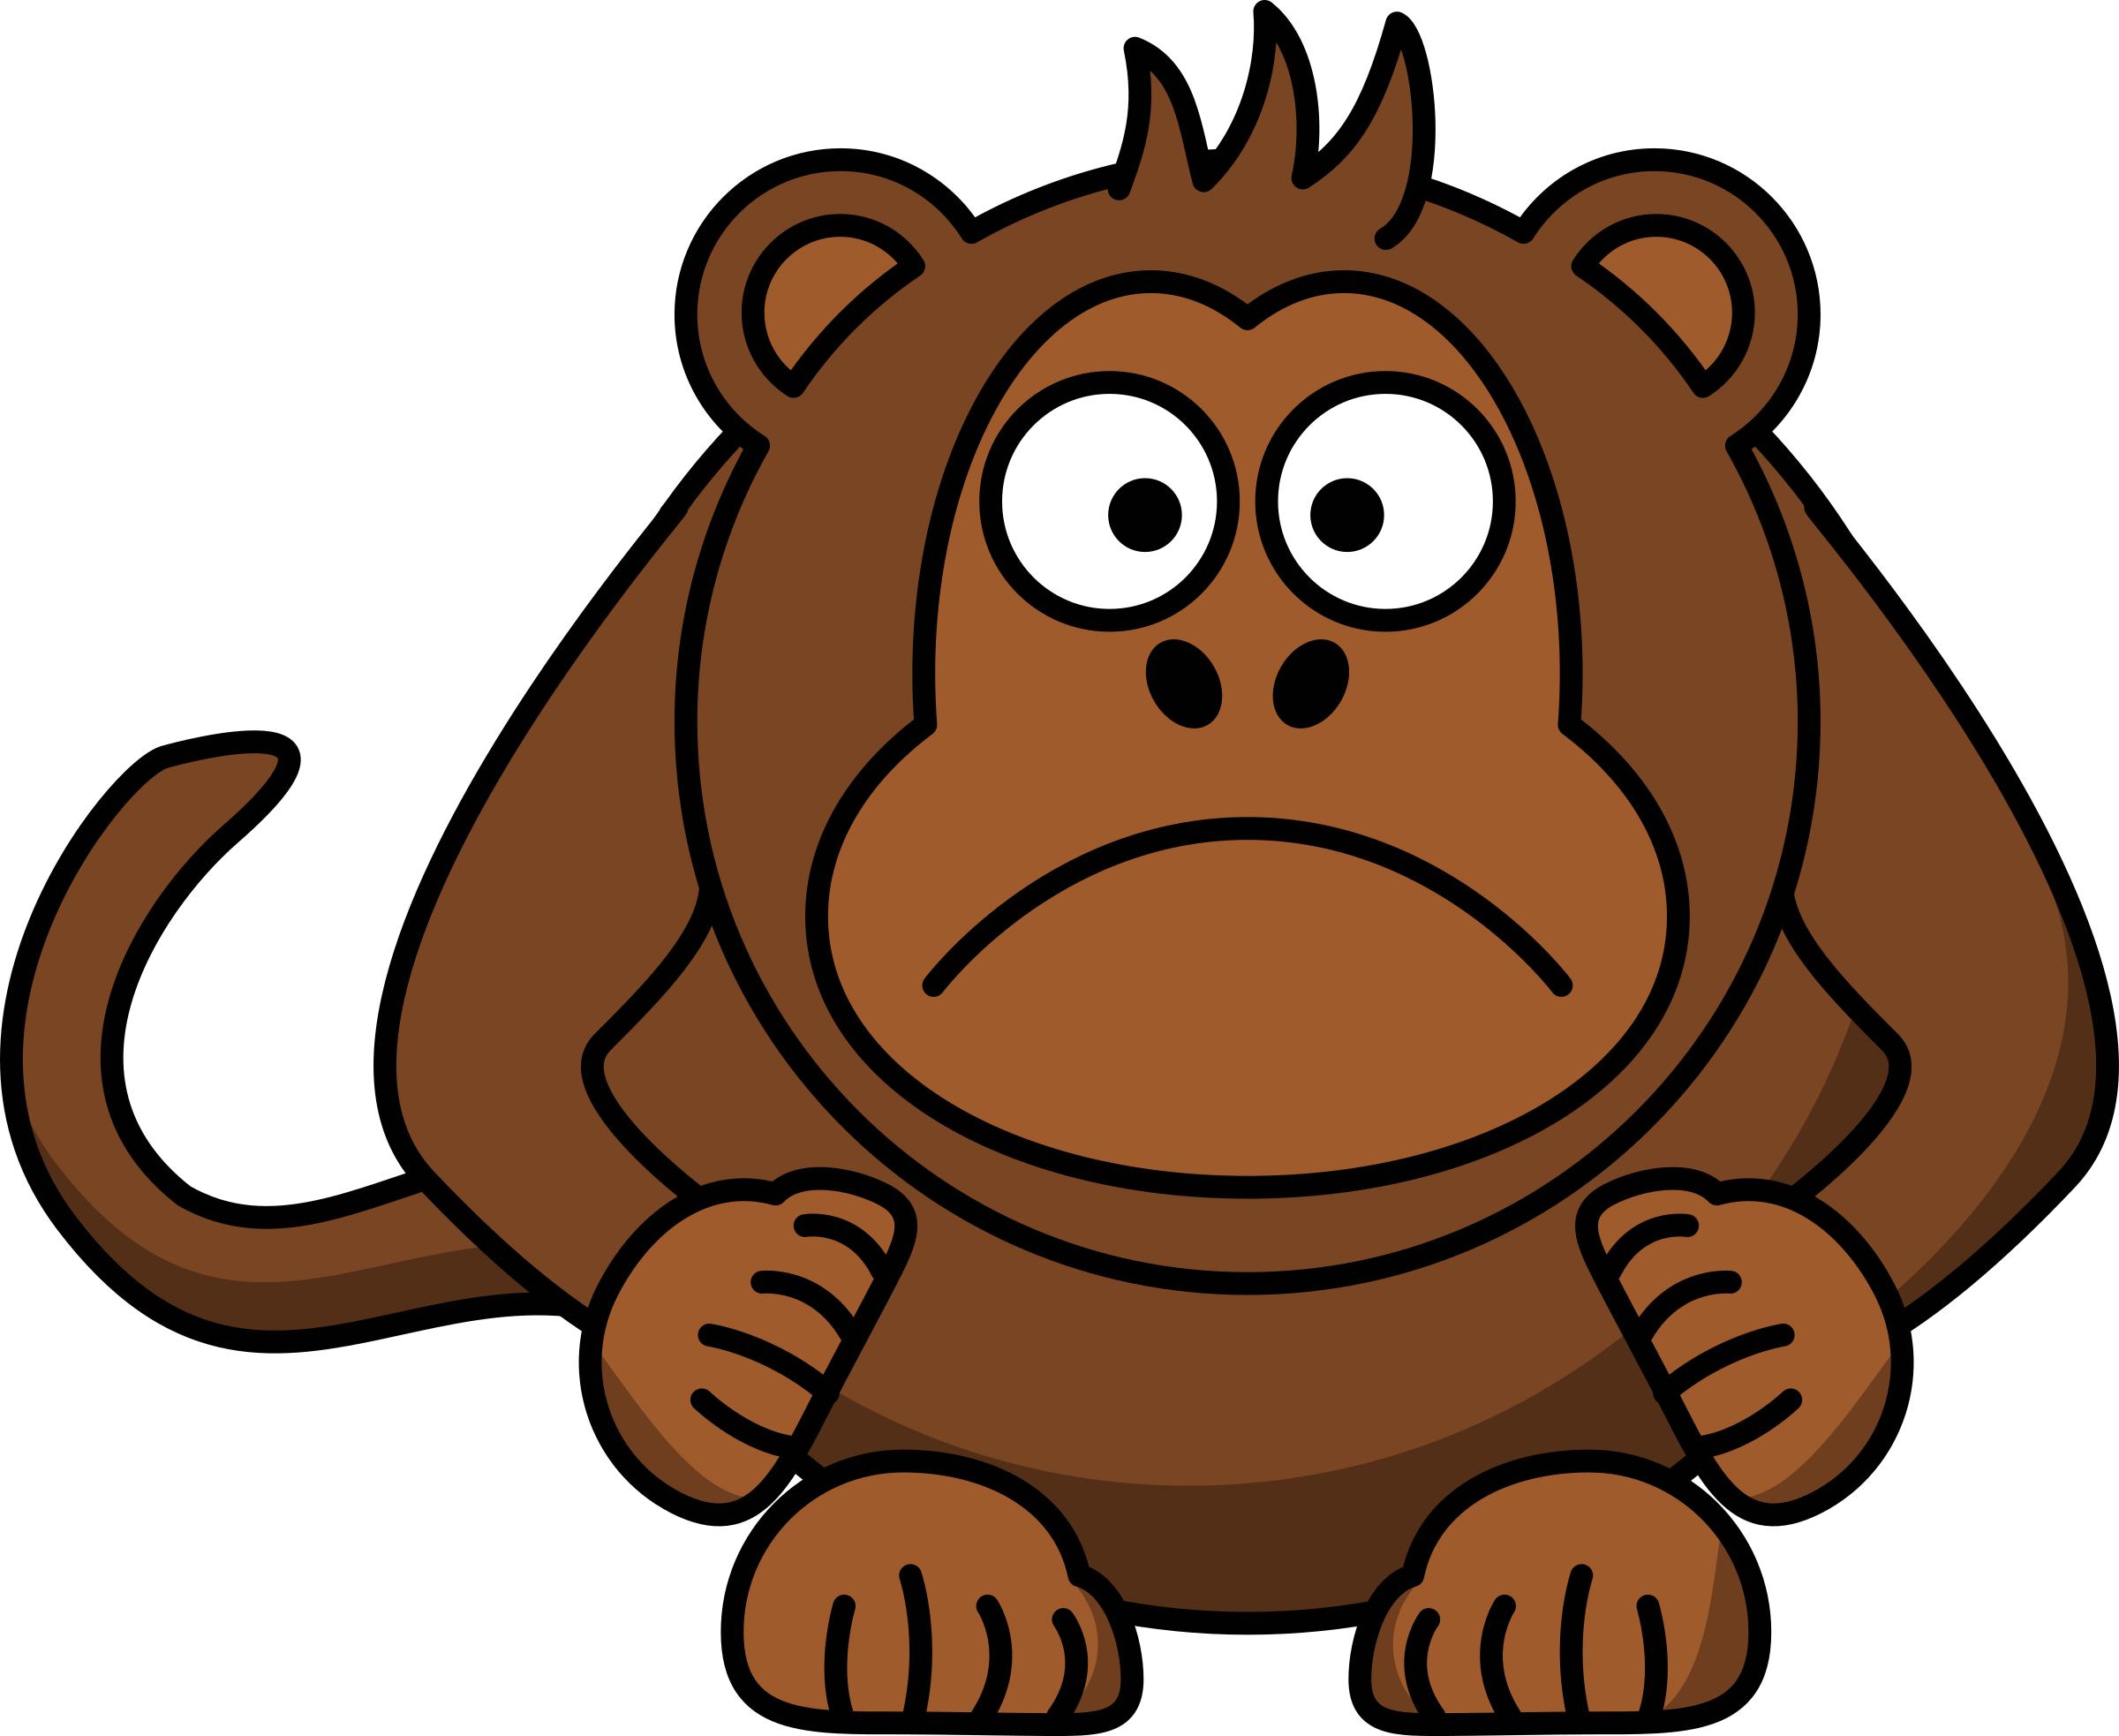 Angry Cartoon monkey PNG icons